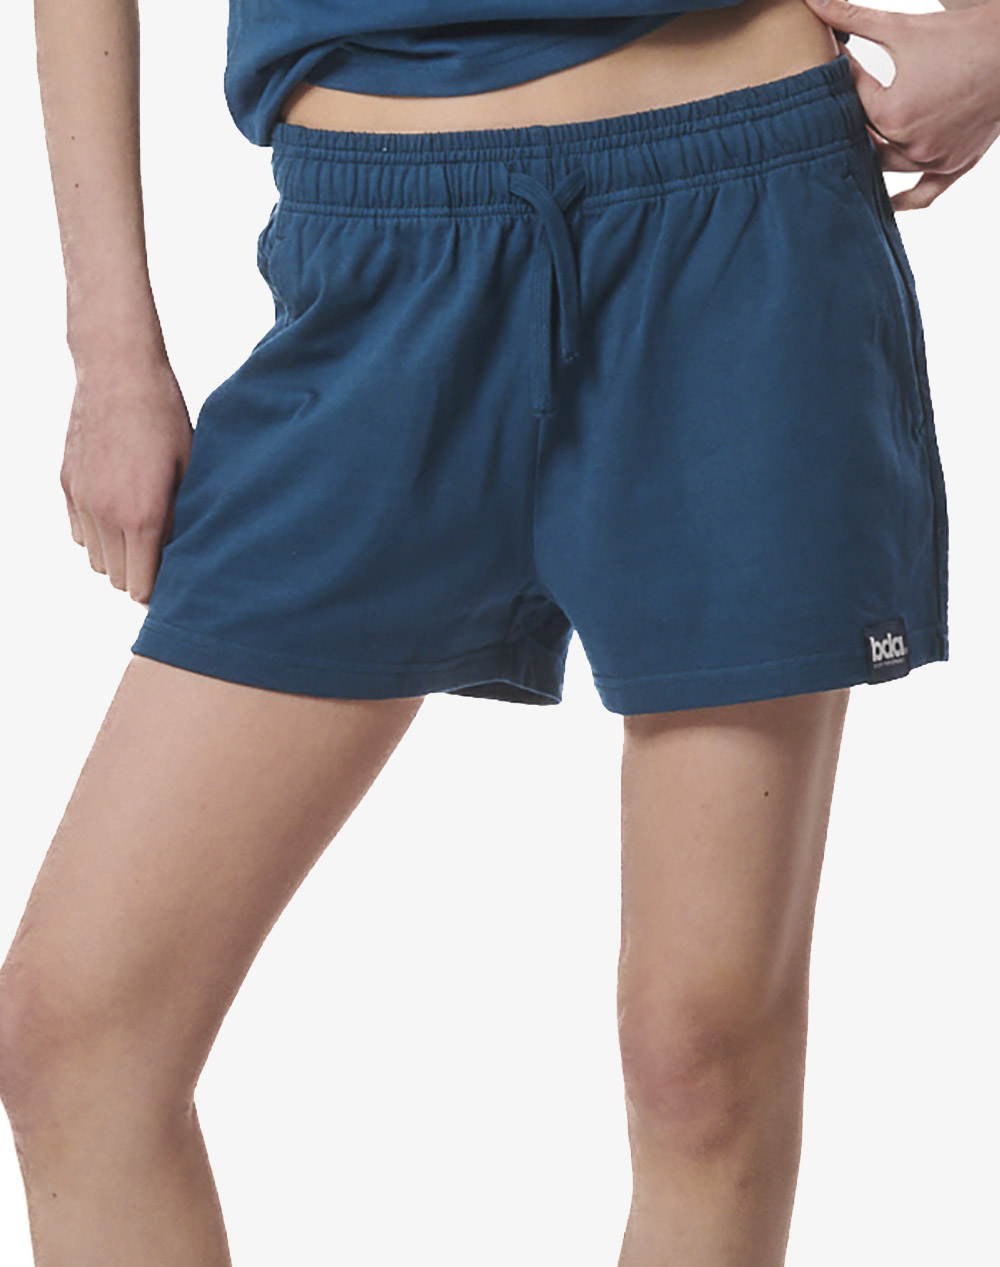 BODY ACTION WOMENS ESSENTIAL LOUNGE SHORTS